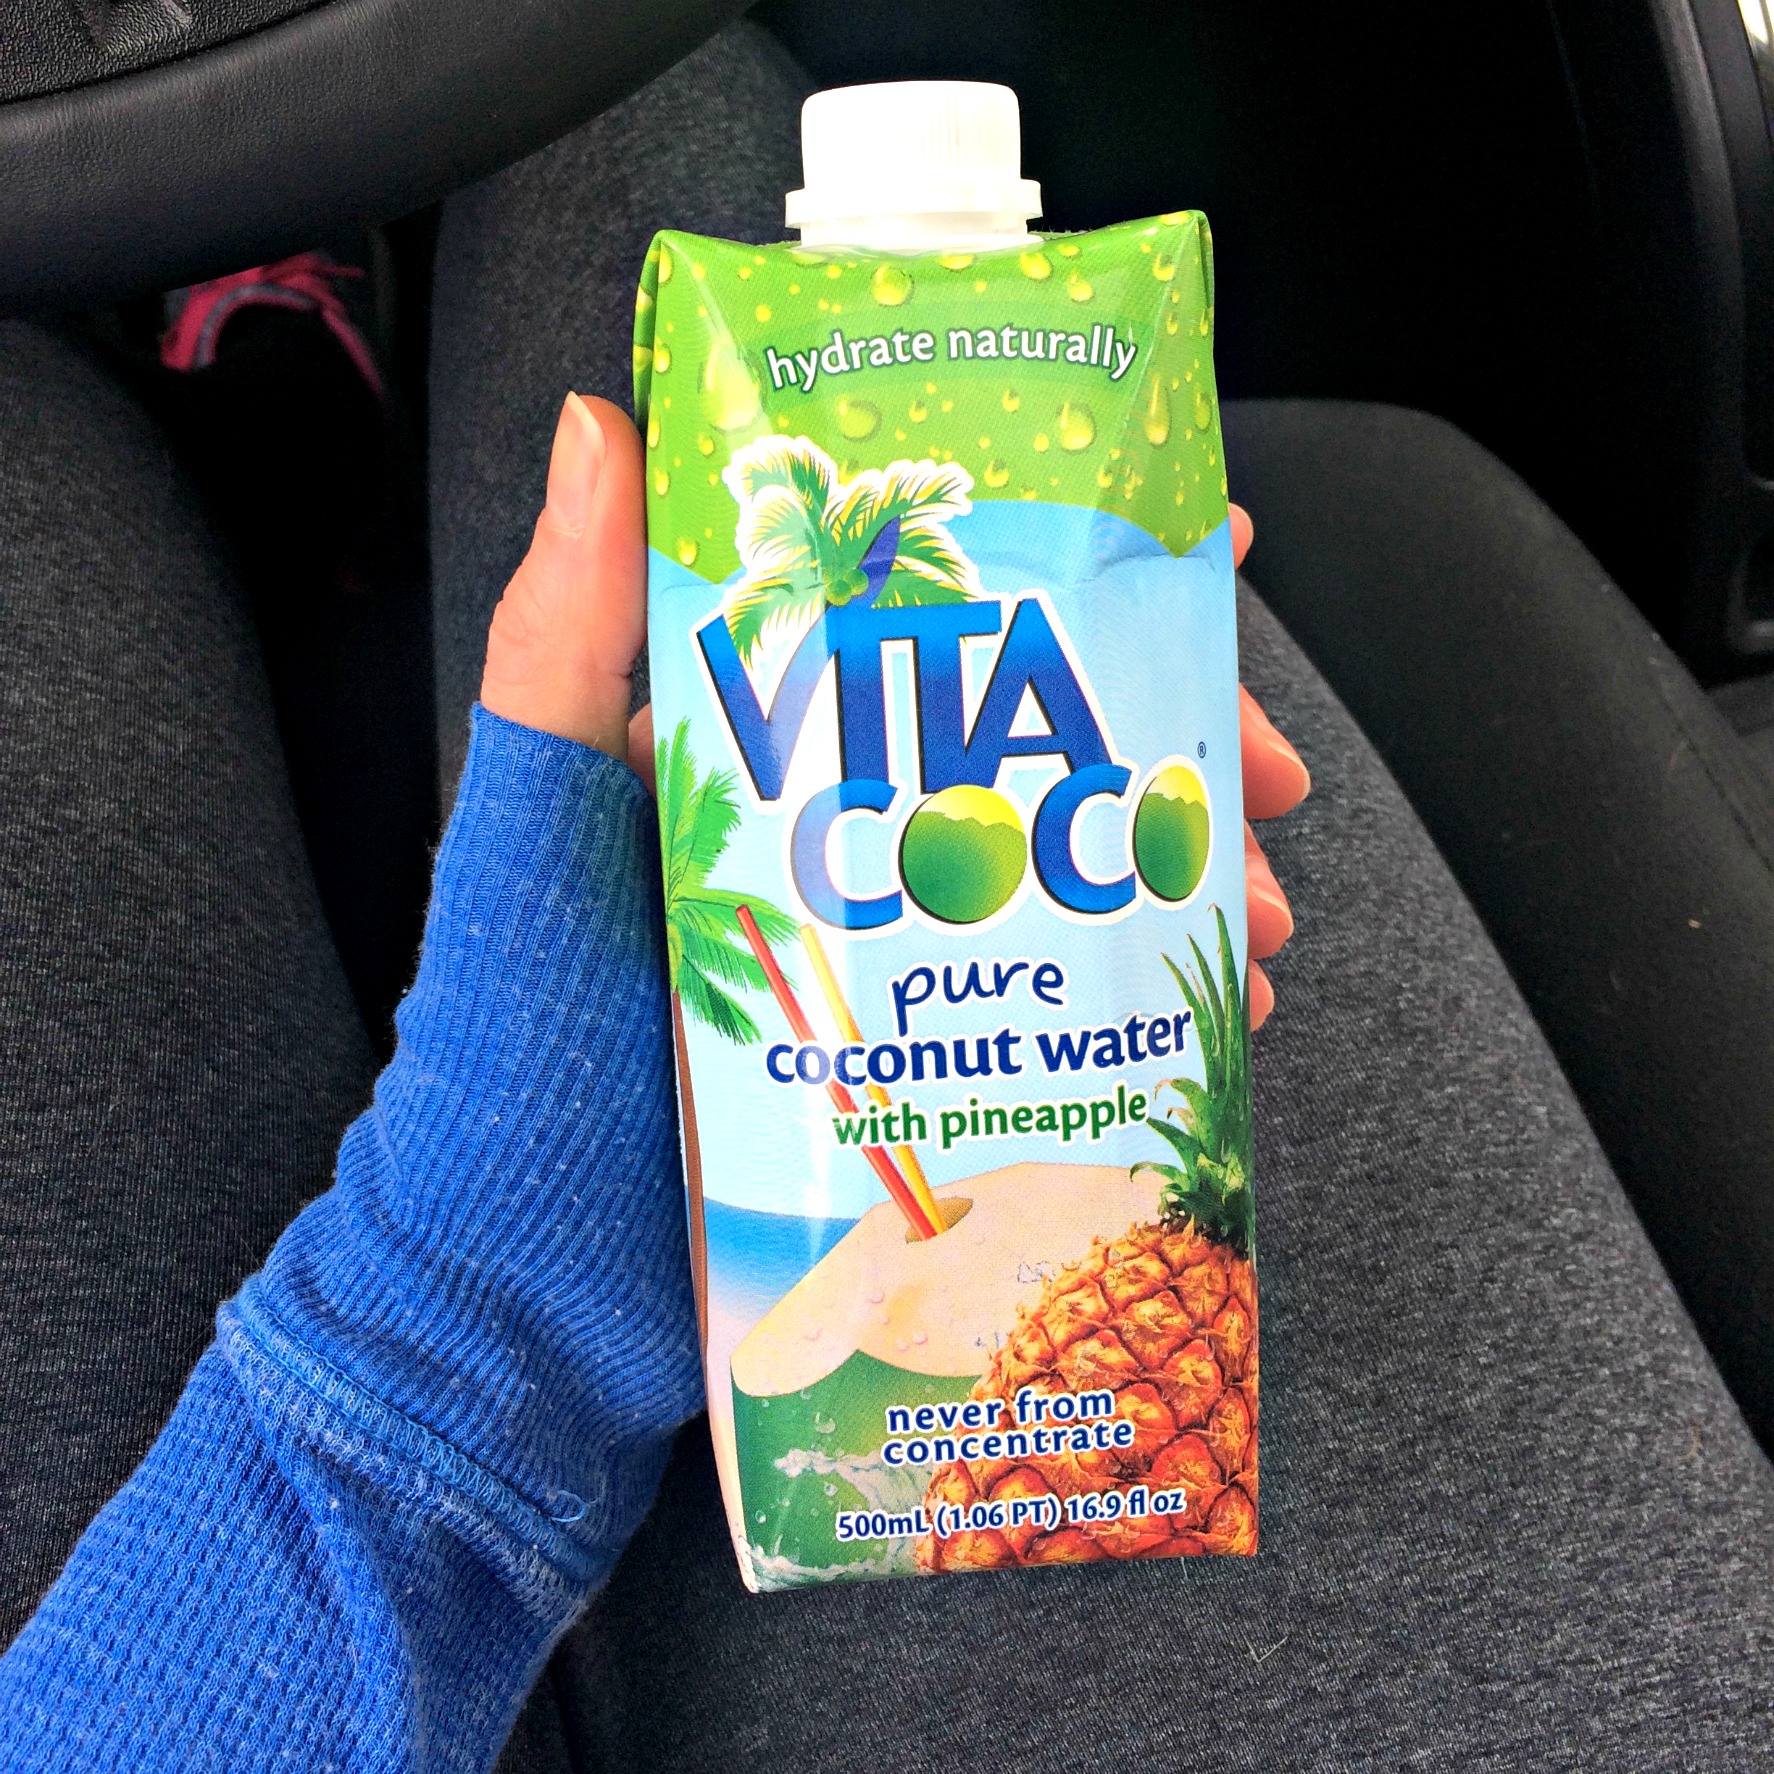 vitacoco coconut water with pineapple